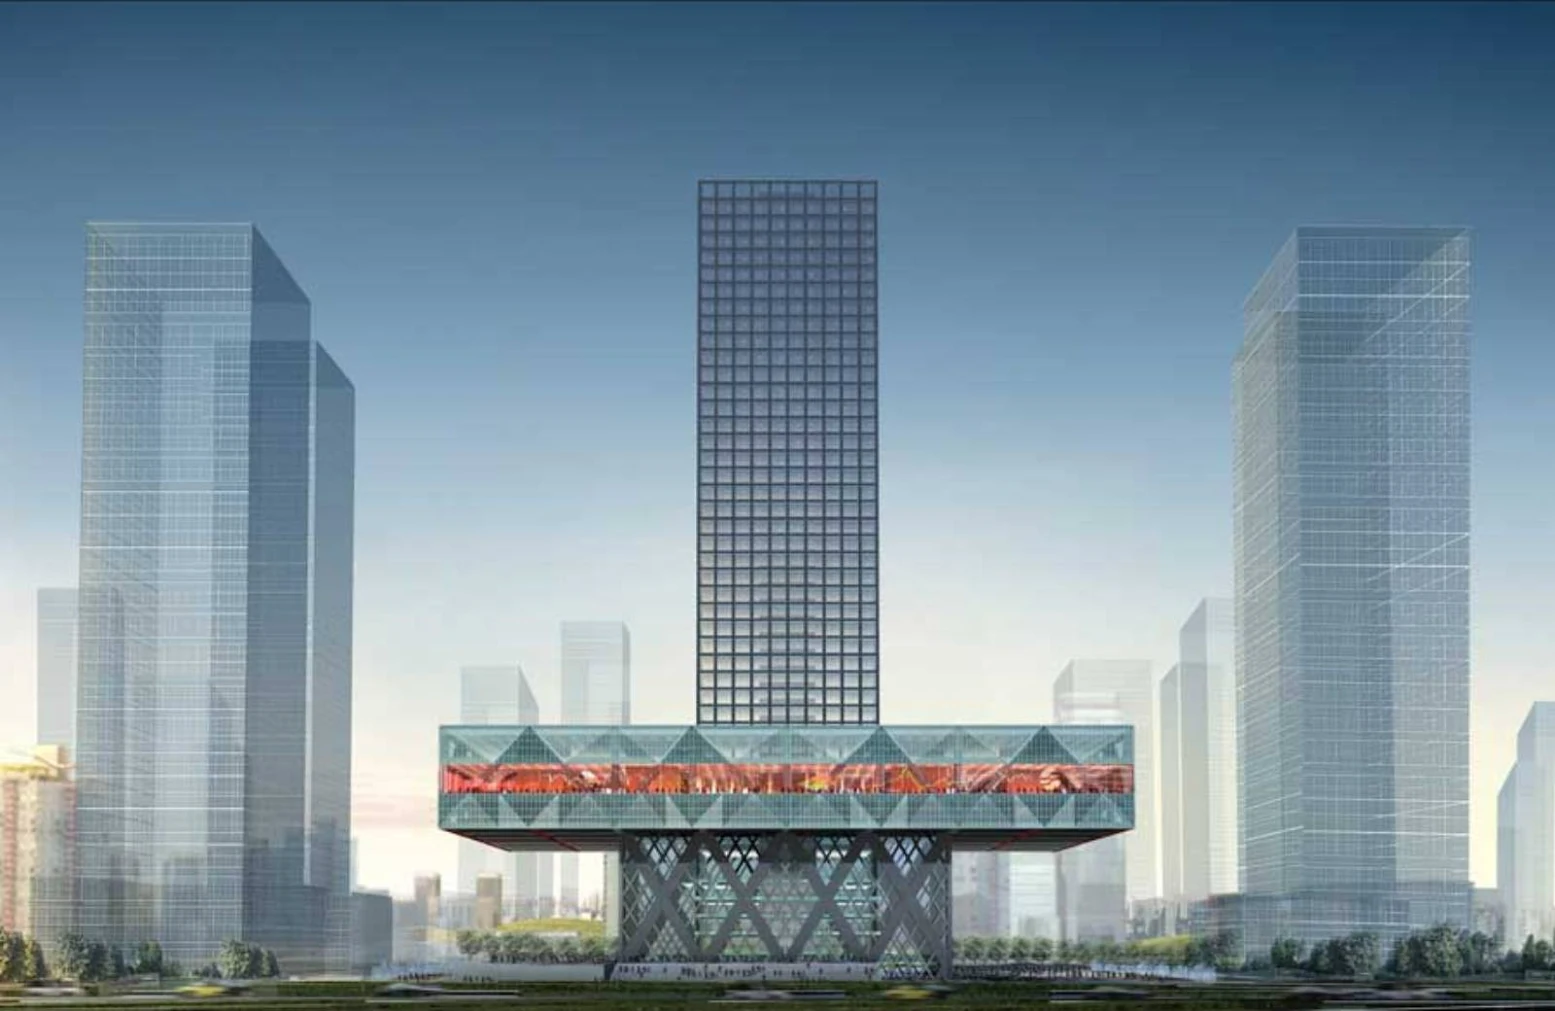 Shenzhen Stock Exchange Building by OMA